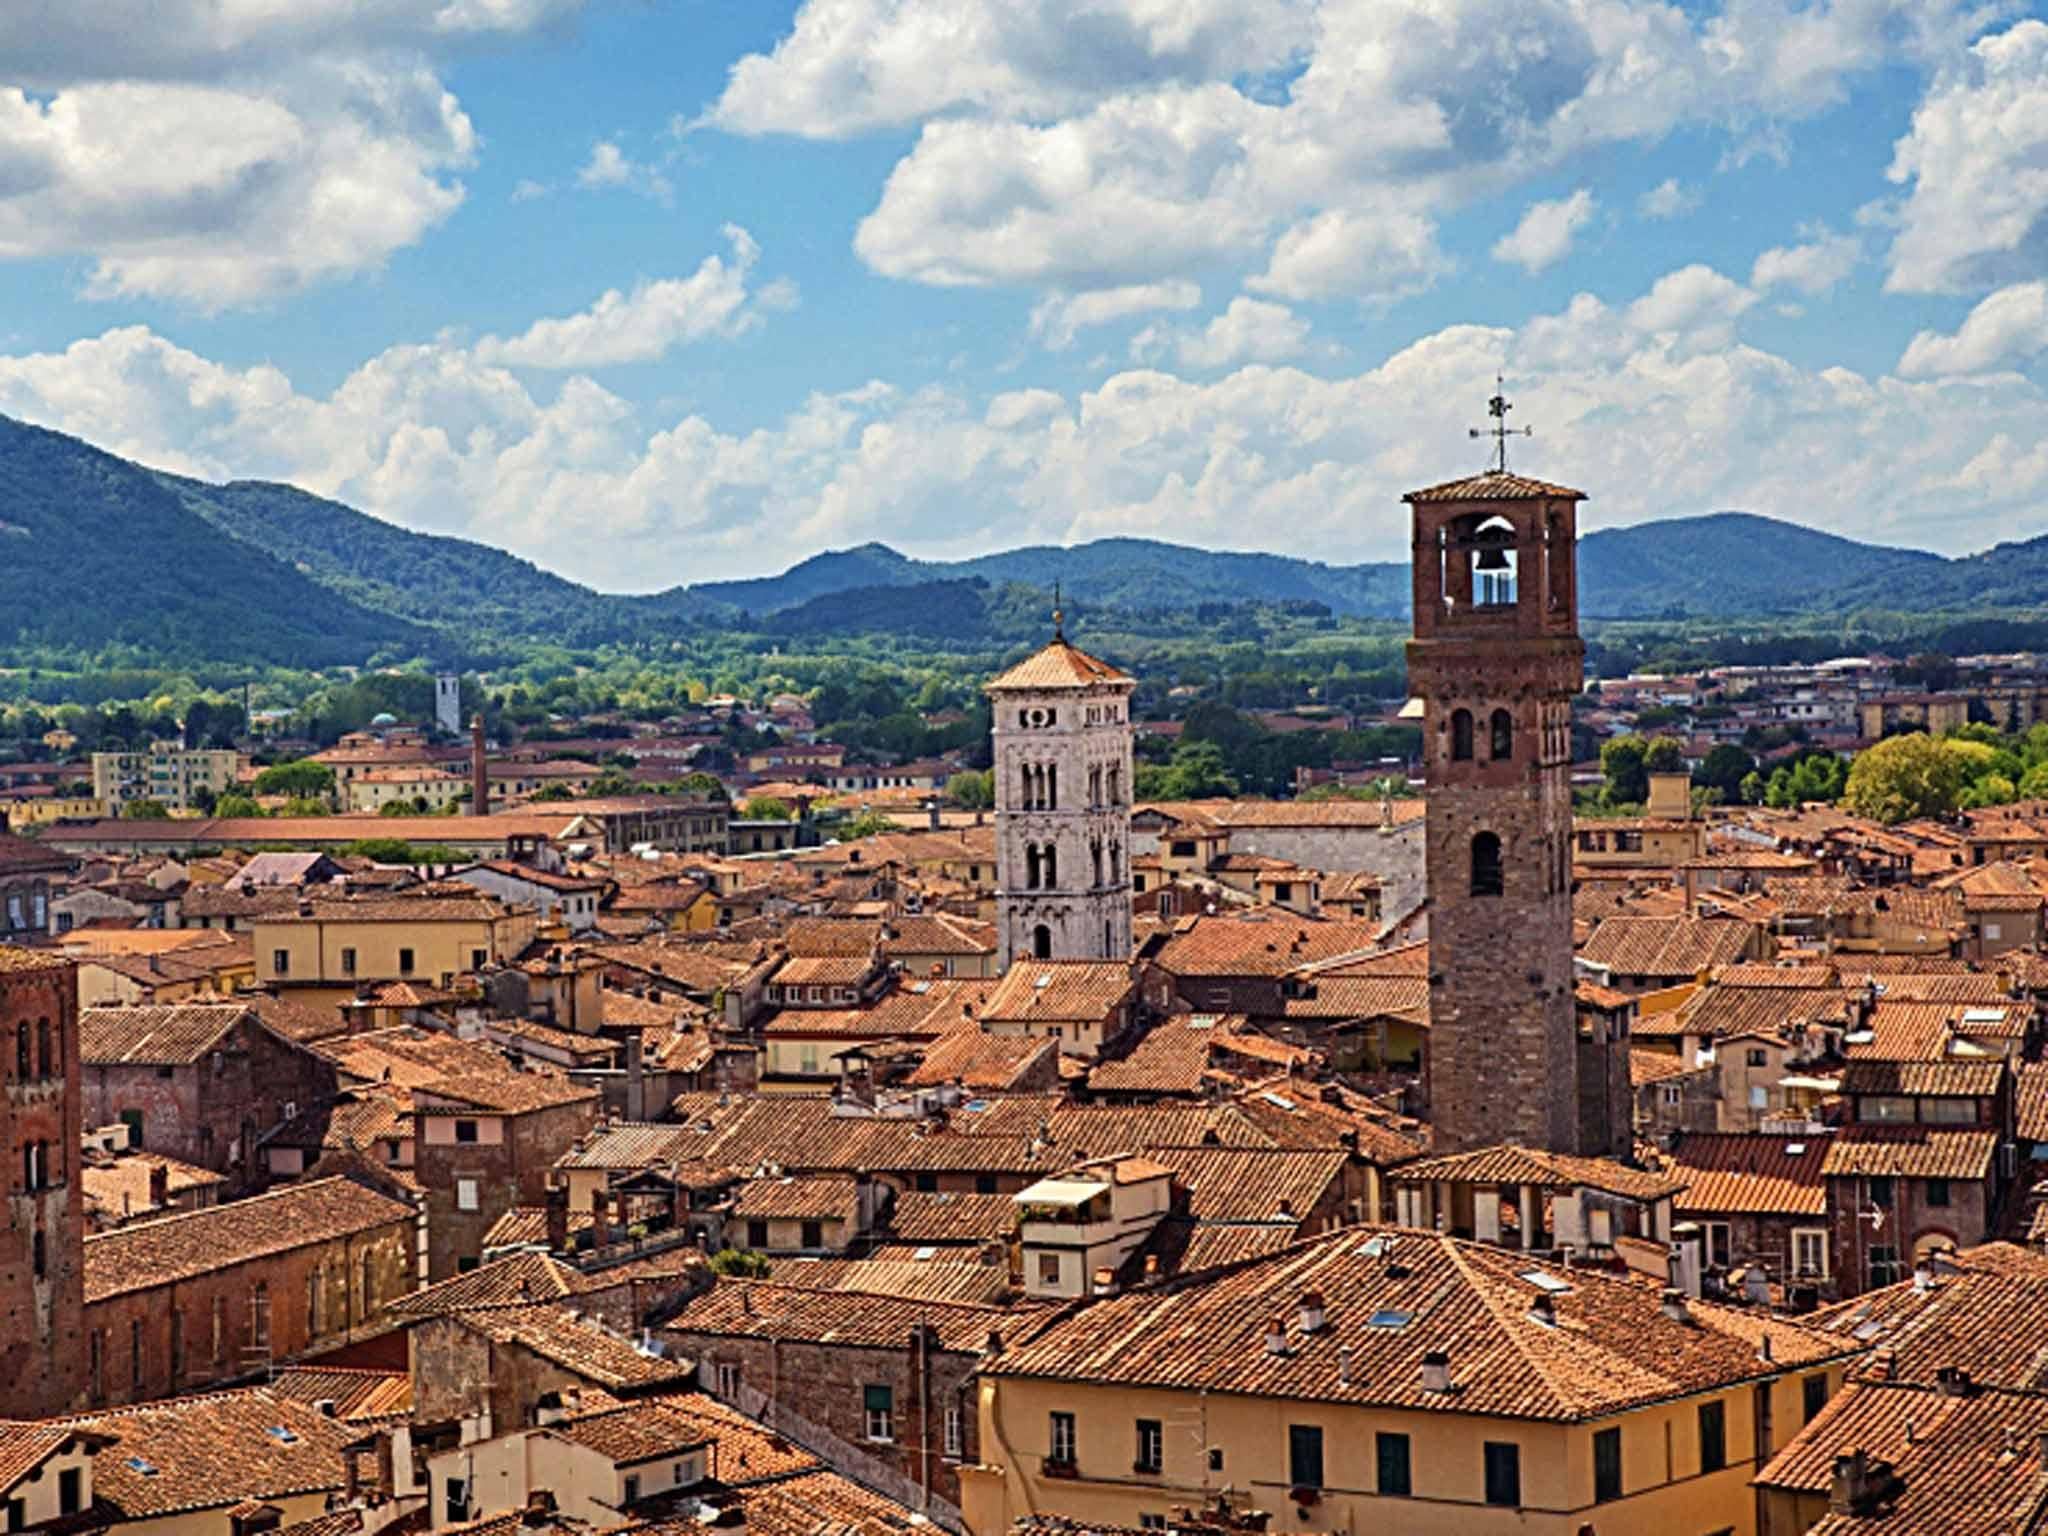 Lovely Lucca: 'We went for a day and ended up living there'